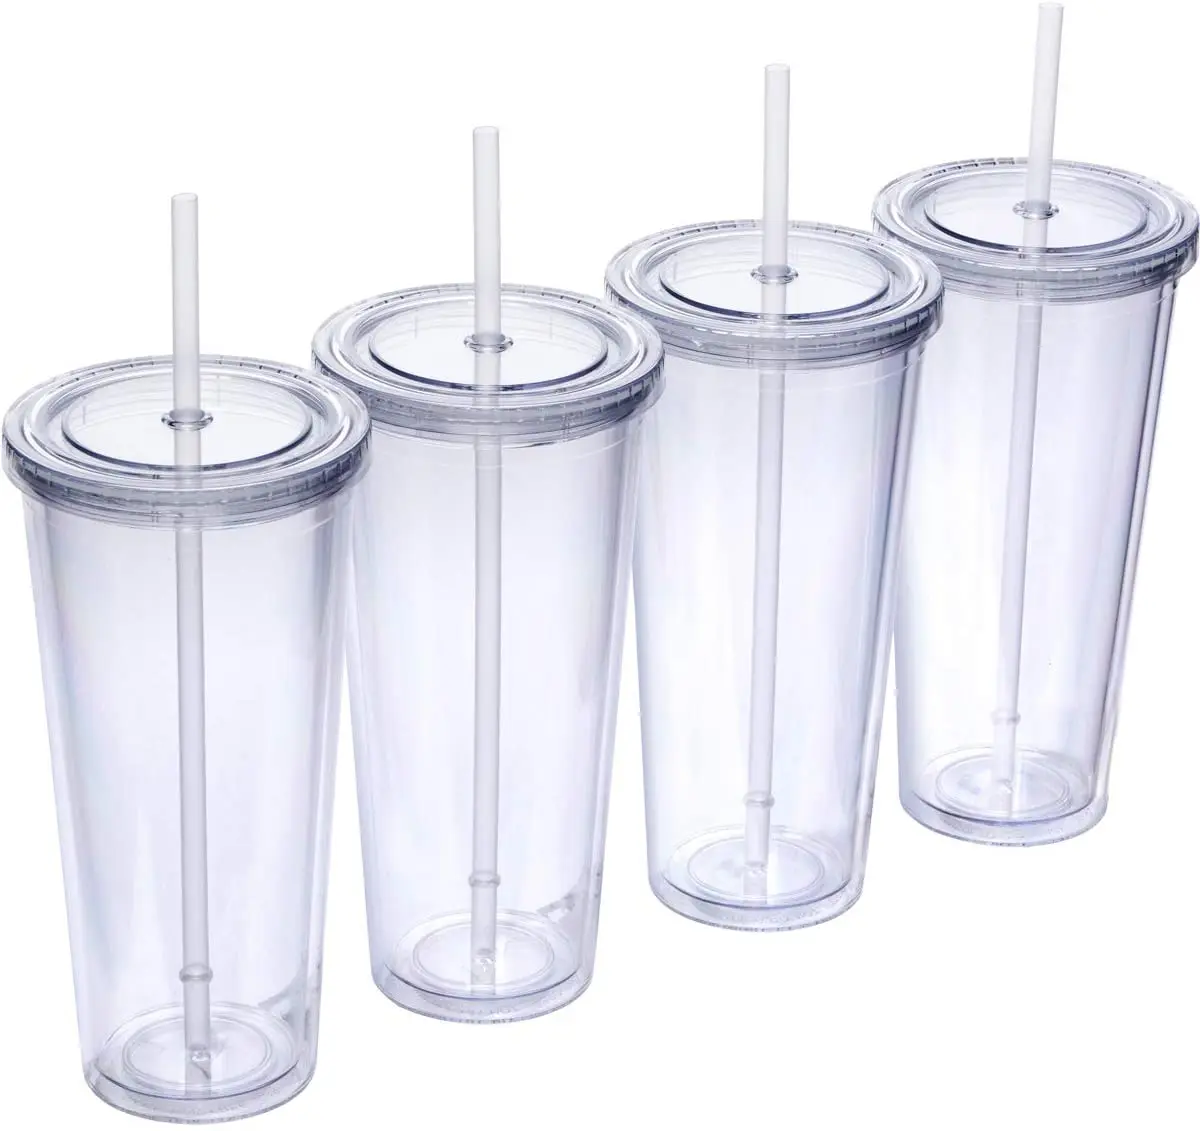 

Clear Plastic Tumblers 24oz BPA-FREE Double Wall Insulate Reusable Travel Ice Coffee Mugs With Straw Lid In Bulk